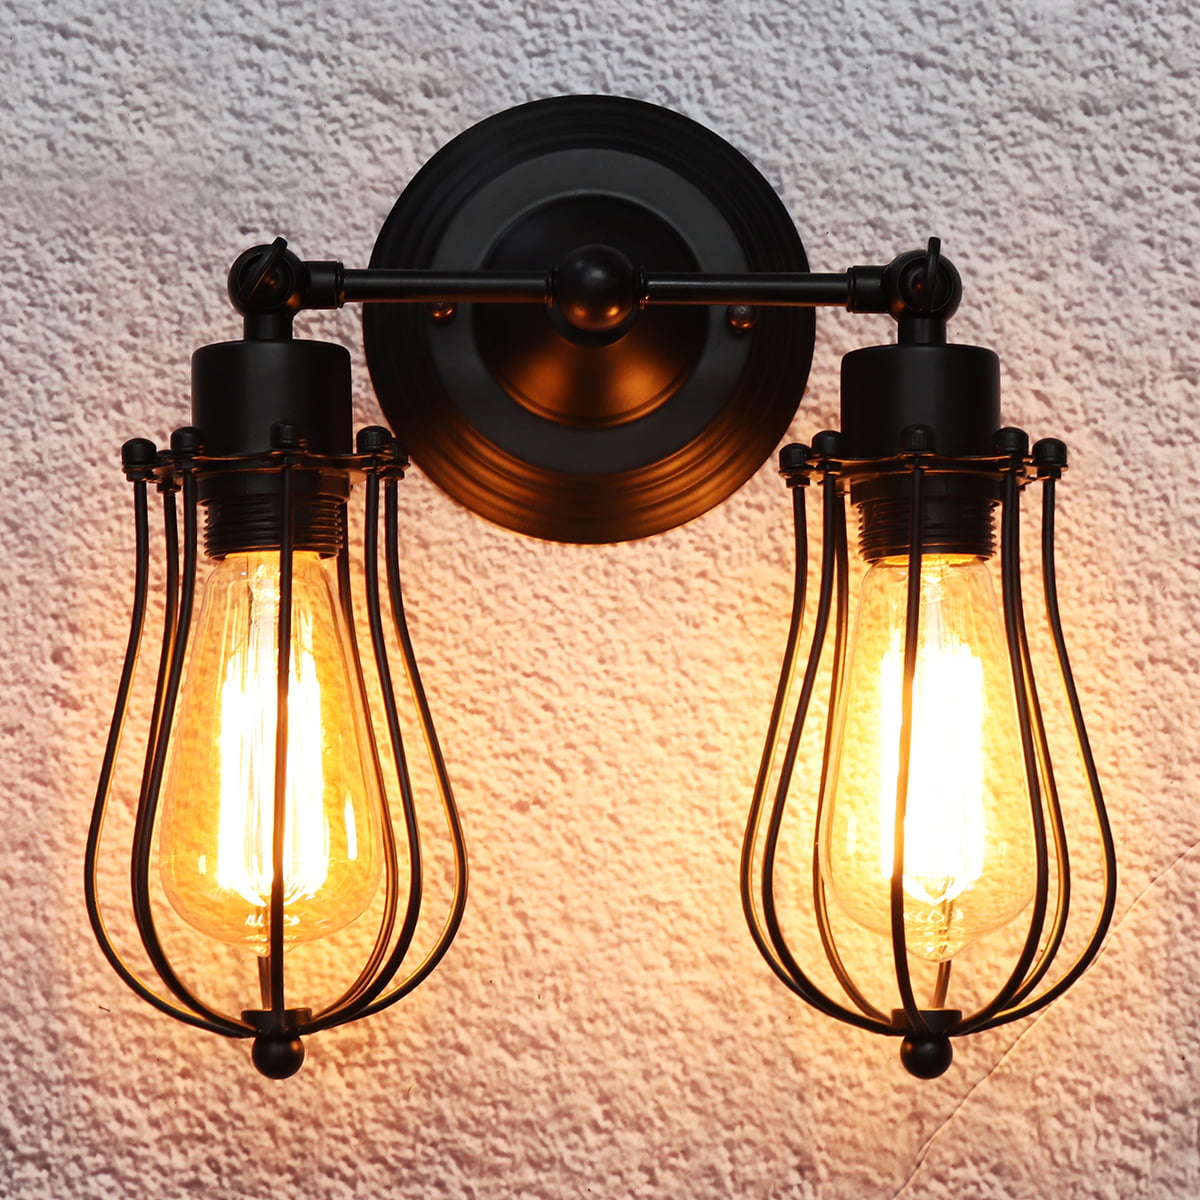 Vintage Lodge Barn Wall Sconce Lamp Country Style Rustic Glass Shade Wall Light